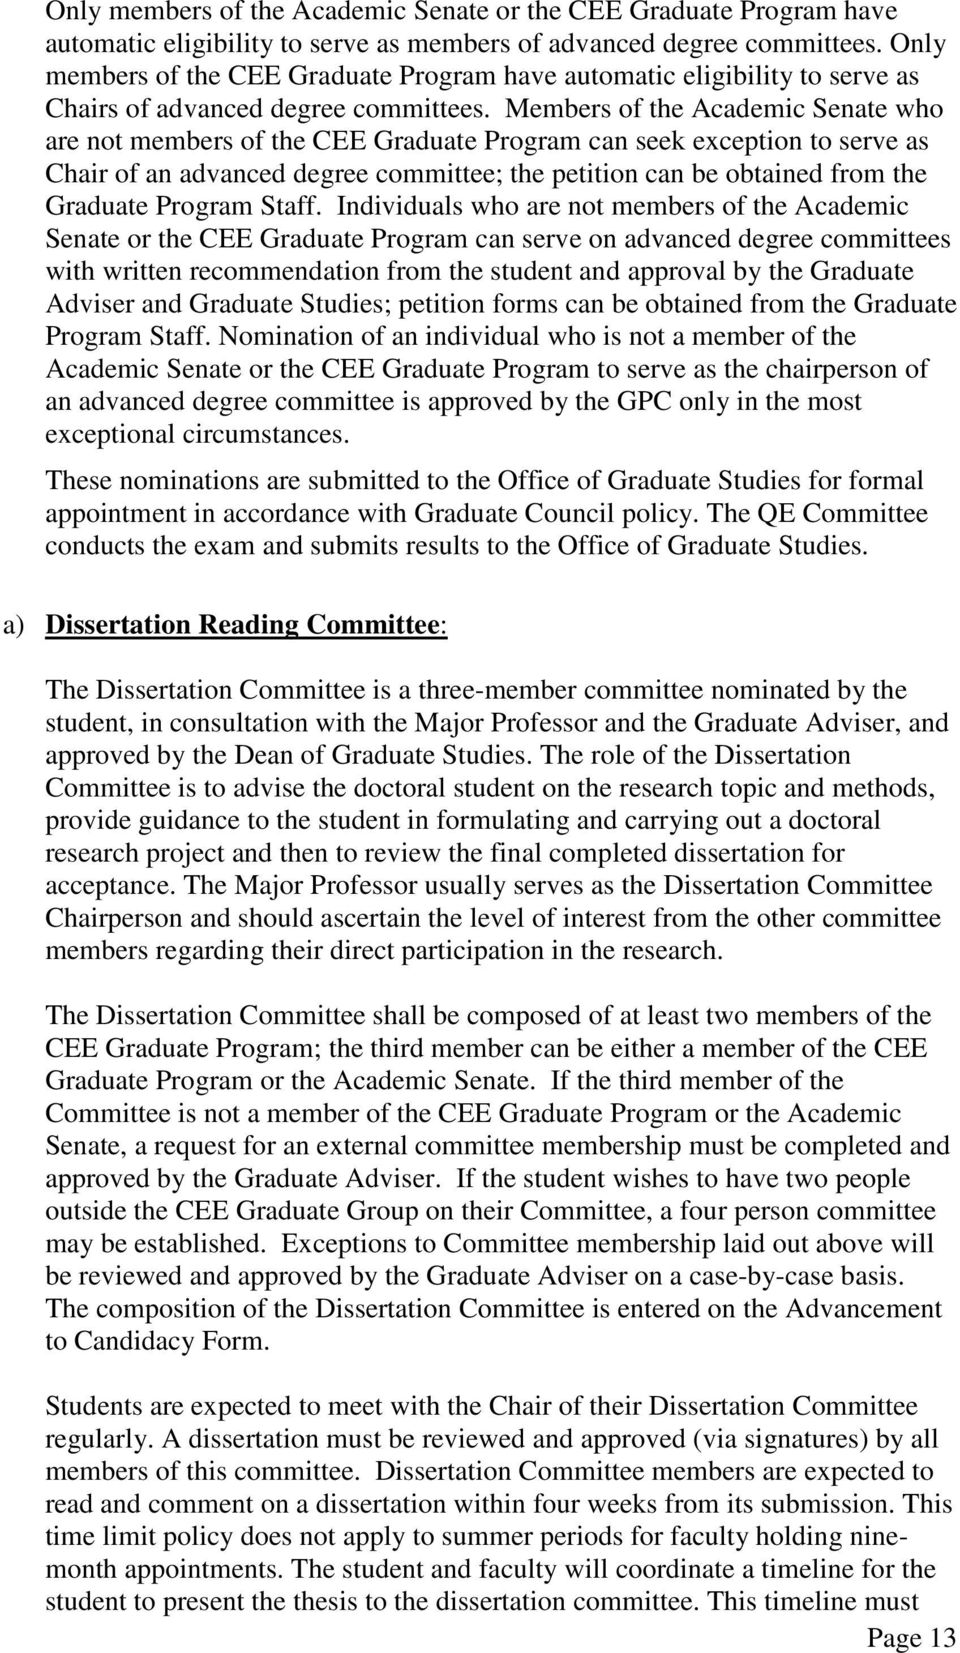 Members of the Academic Senate who are not members of the CEE Graduate Program can seek exception to serve as Chair of an advanced degree committee; the petition can be obtained from the Graduate